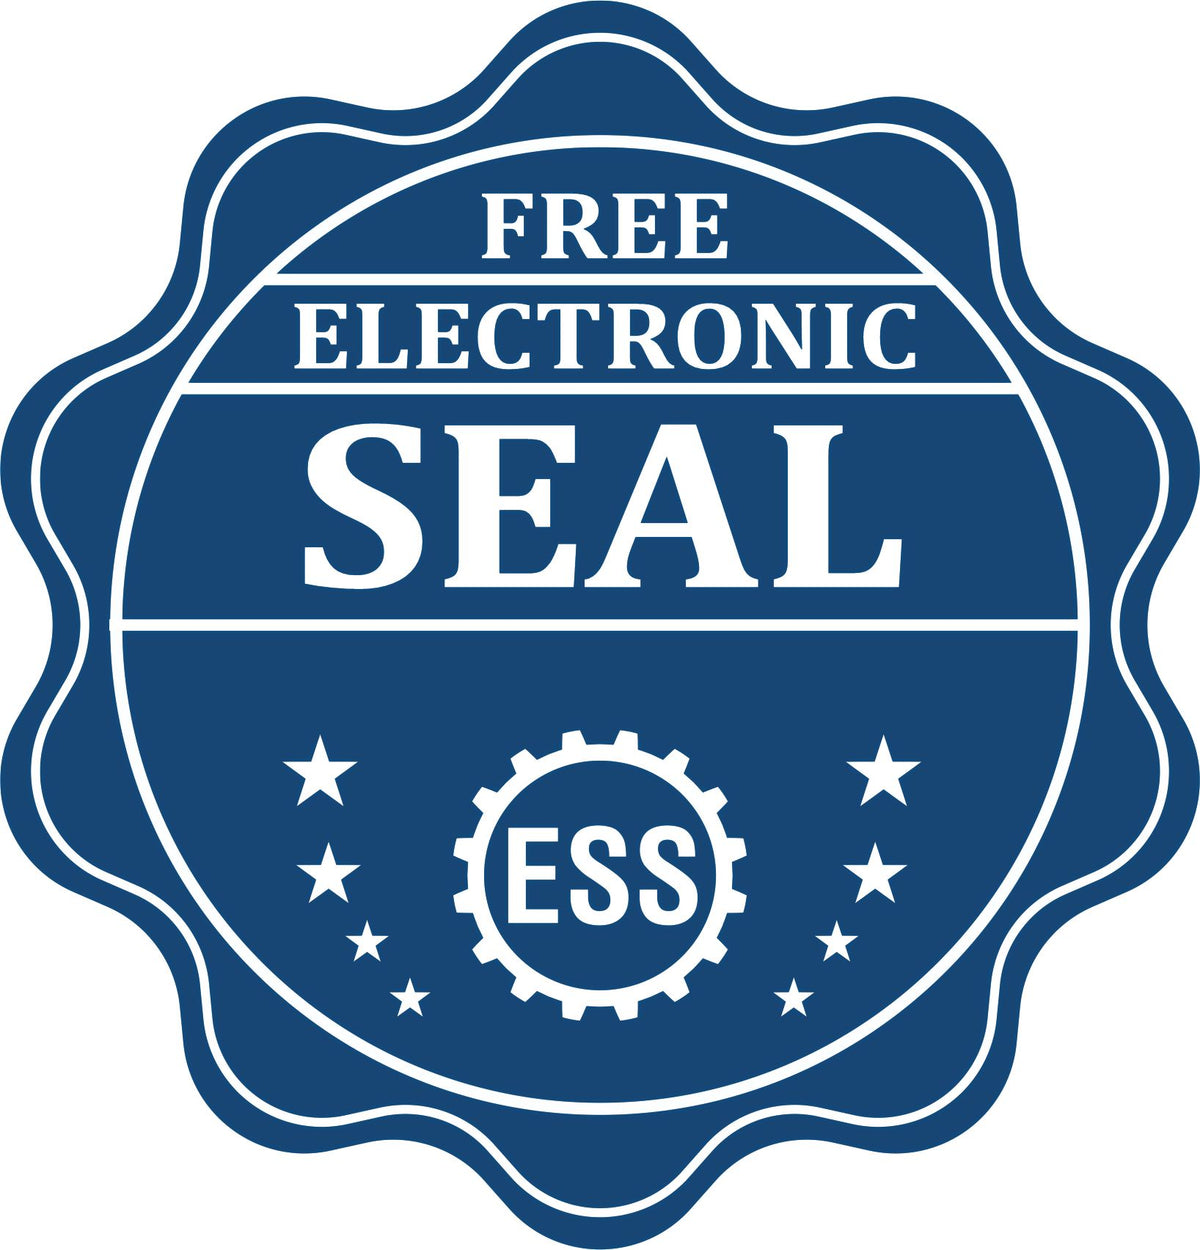 A badge showing a free electronic seal for the Hybrid New Jersey Geologist Seal with stars and the ESS gear on the emblem.